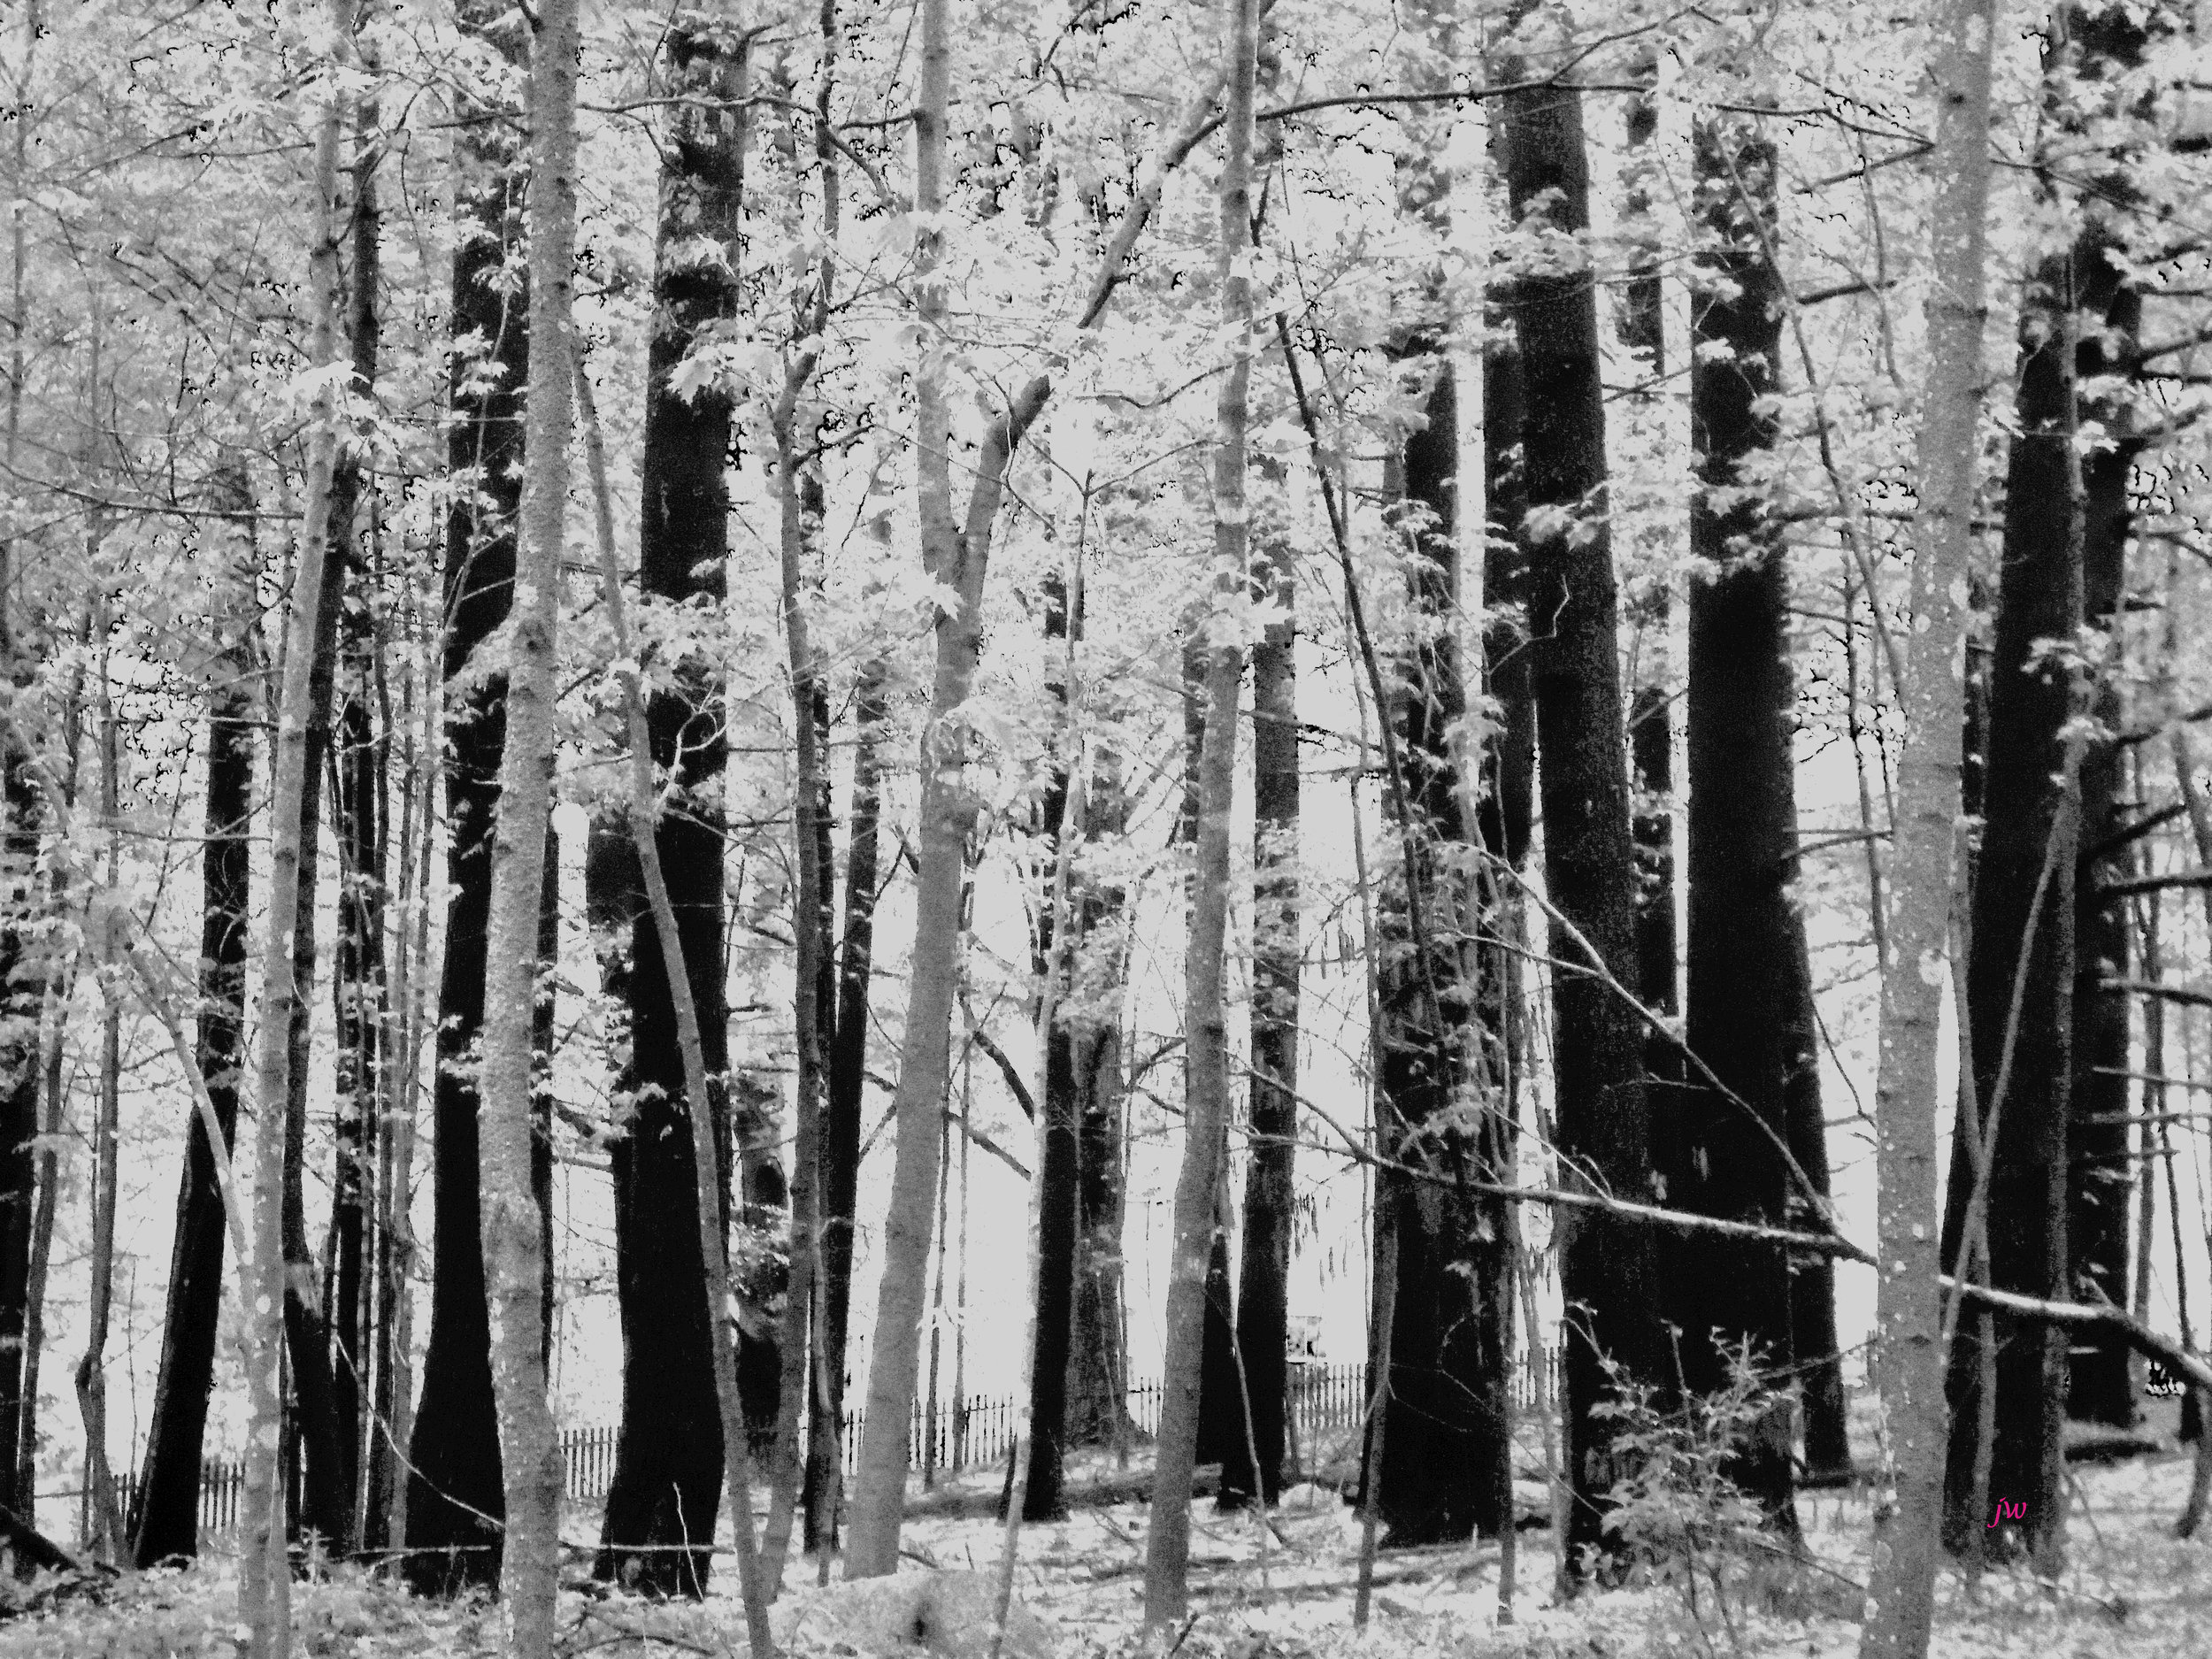 trees by the house4 b&w.jpg